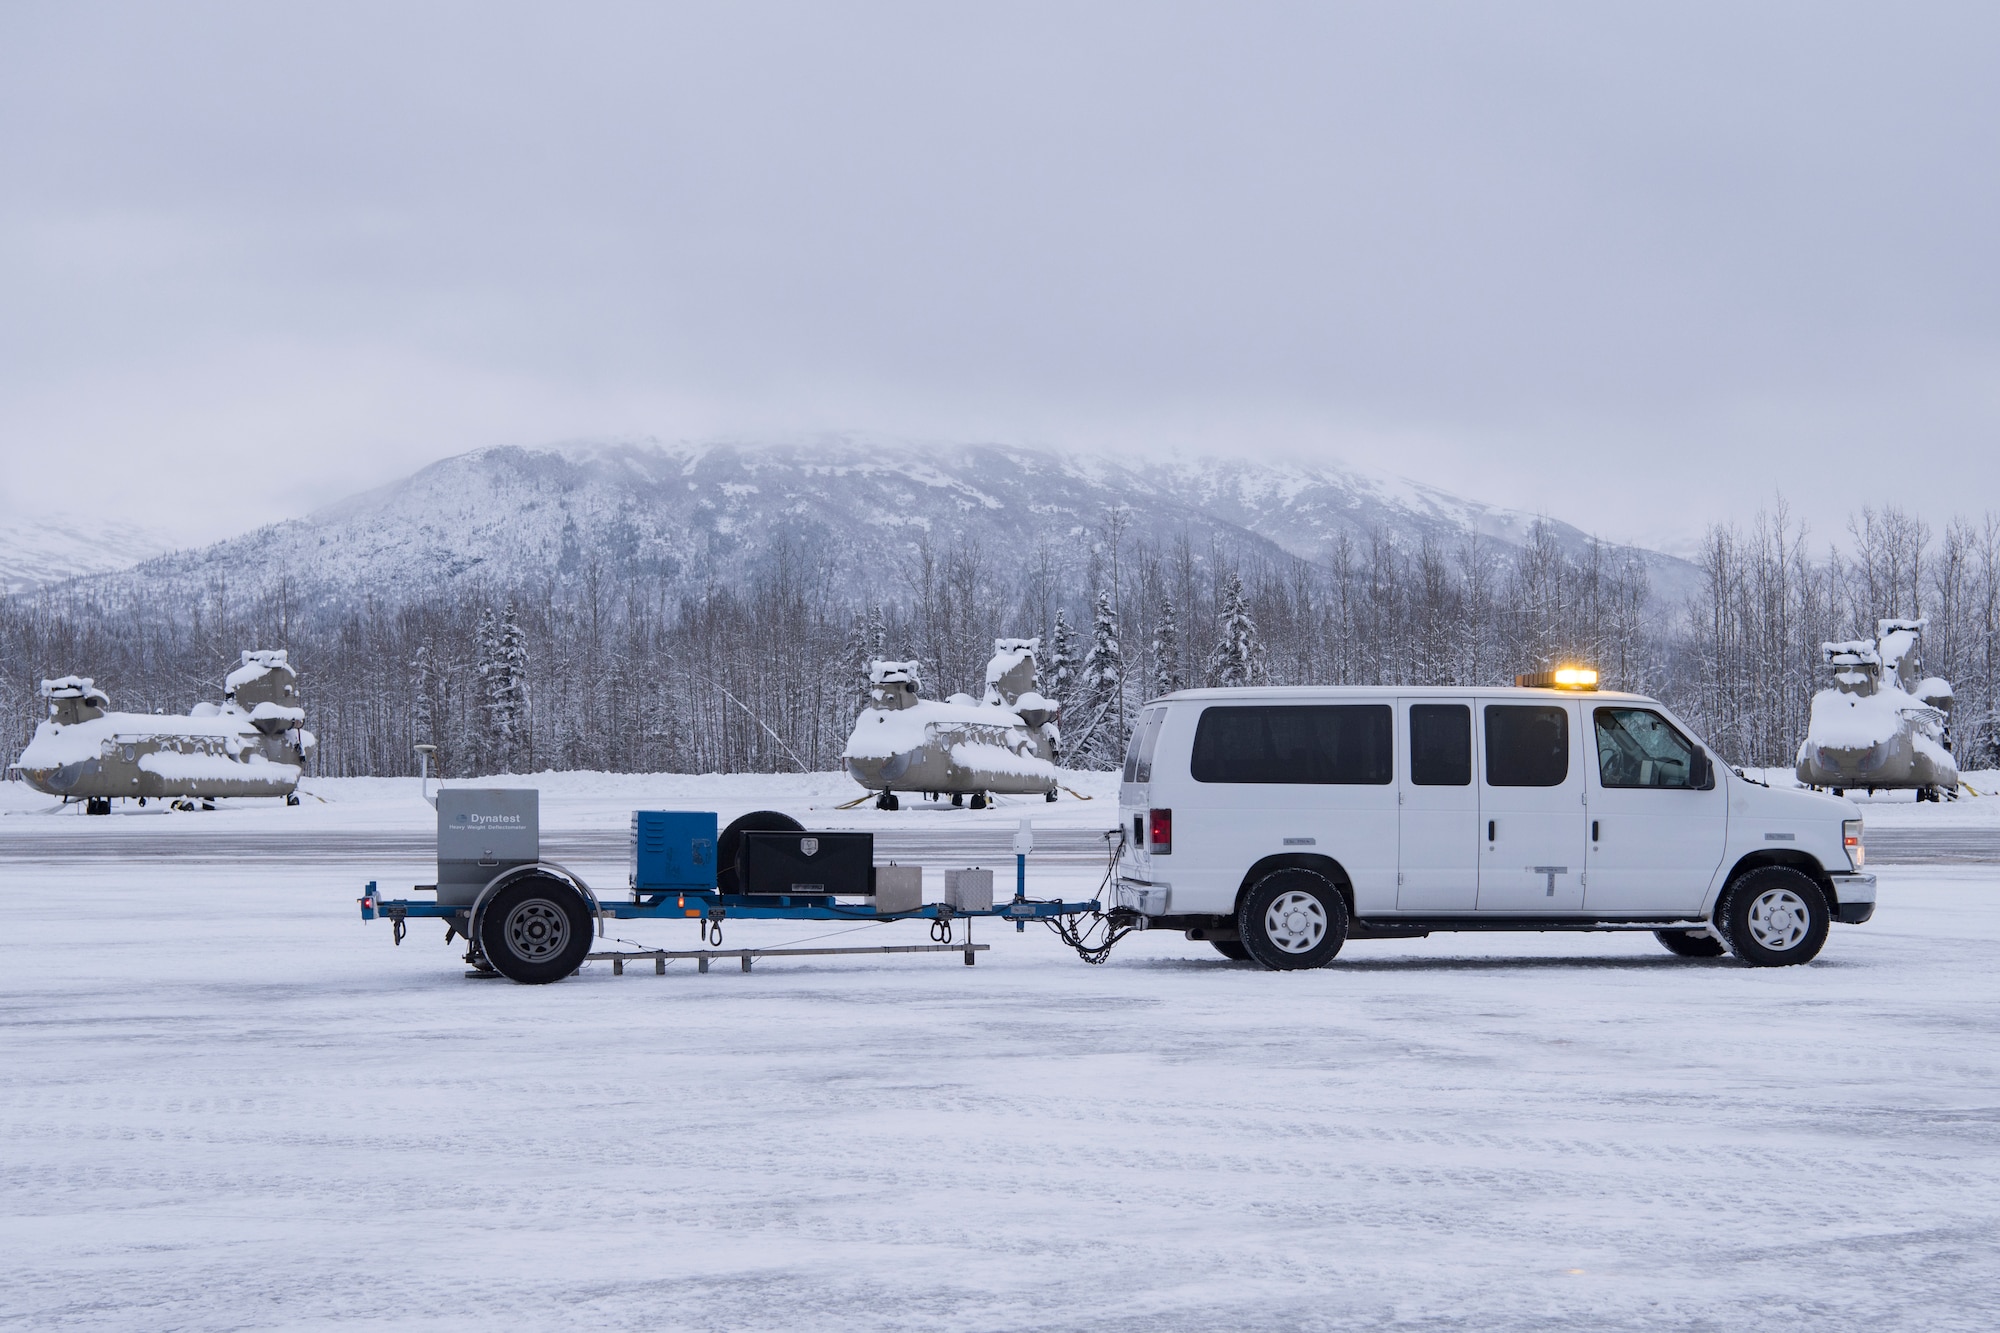 An Air Force Civil Engineer Center’s Airfield Pavement Evaluation Team uses a special heavy falling weight Dynatest deflectometer during an evaluation of Bryant Army Airfield at Joint Base Elmendorf-Richardson, Alaska Dec. 17, 2018. The two-person team used non-destructive testing to assess potential non-visible pavement damage at all of JBER’s airfields following the Nov. 30, 7.0 magnitude earthquake, whose epicenter was located just north of the base. The deflectometer simulates 55,000 pounds of weight hitting the pavement at once. (U.S. Air Force photo by Airman 1st Class Crystal A. Jenkins)